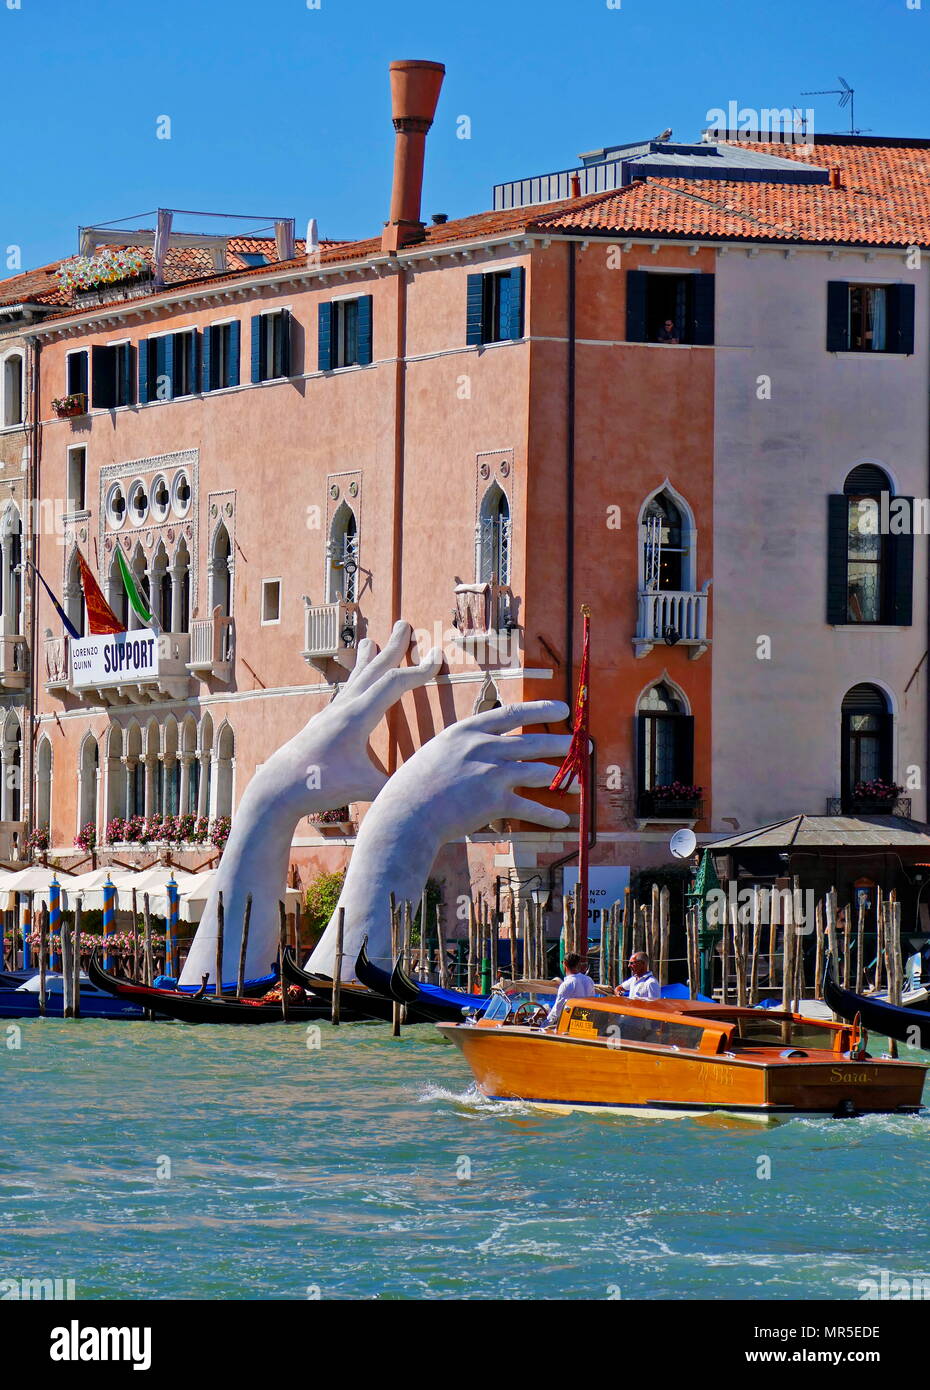 A sculpture of large hands emerges from the grand canal, seemingly supporting and bracing the ca’ sagredo hotel, Venice. By Lorenzo Quinn (born May 7, 1966), Italian sculptor and son of actor Anthony Quinn Stock Photo